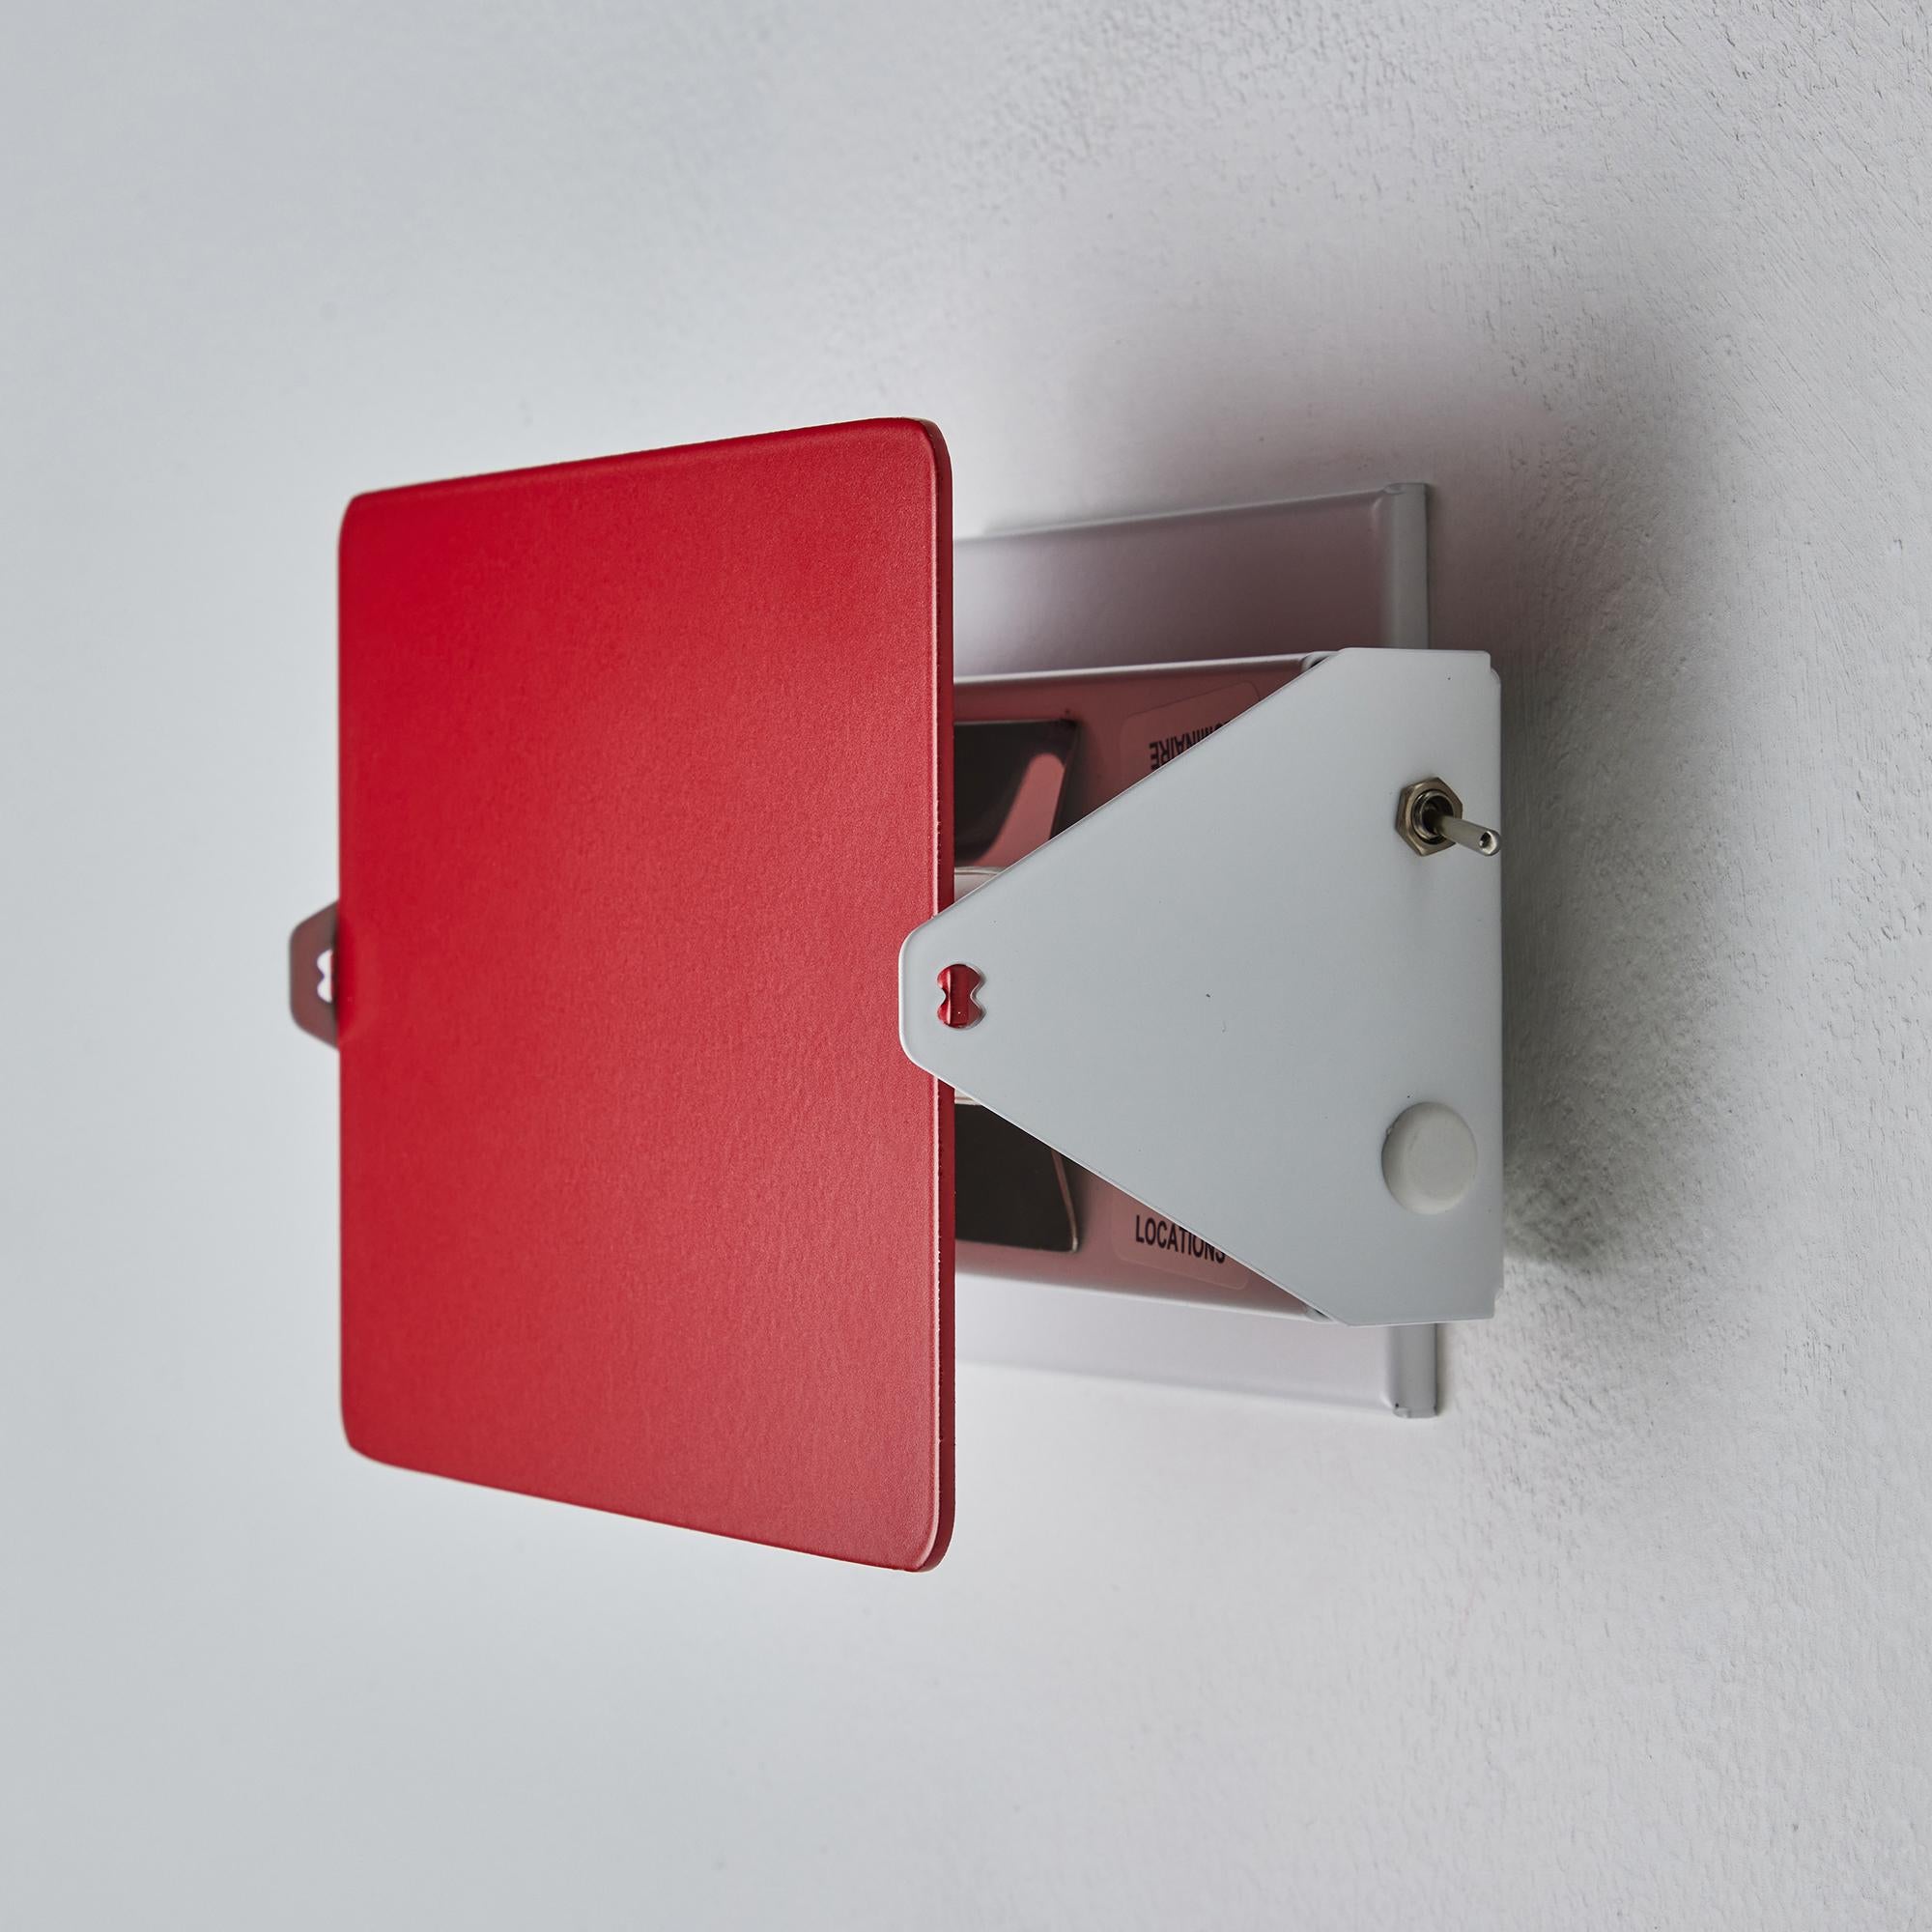 Contemporary Charlotte Perriand 'Applique à Volet Pivotant' Wall Light in Red for Nemo For Sale